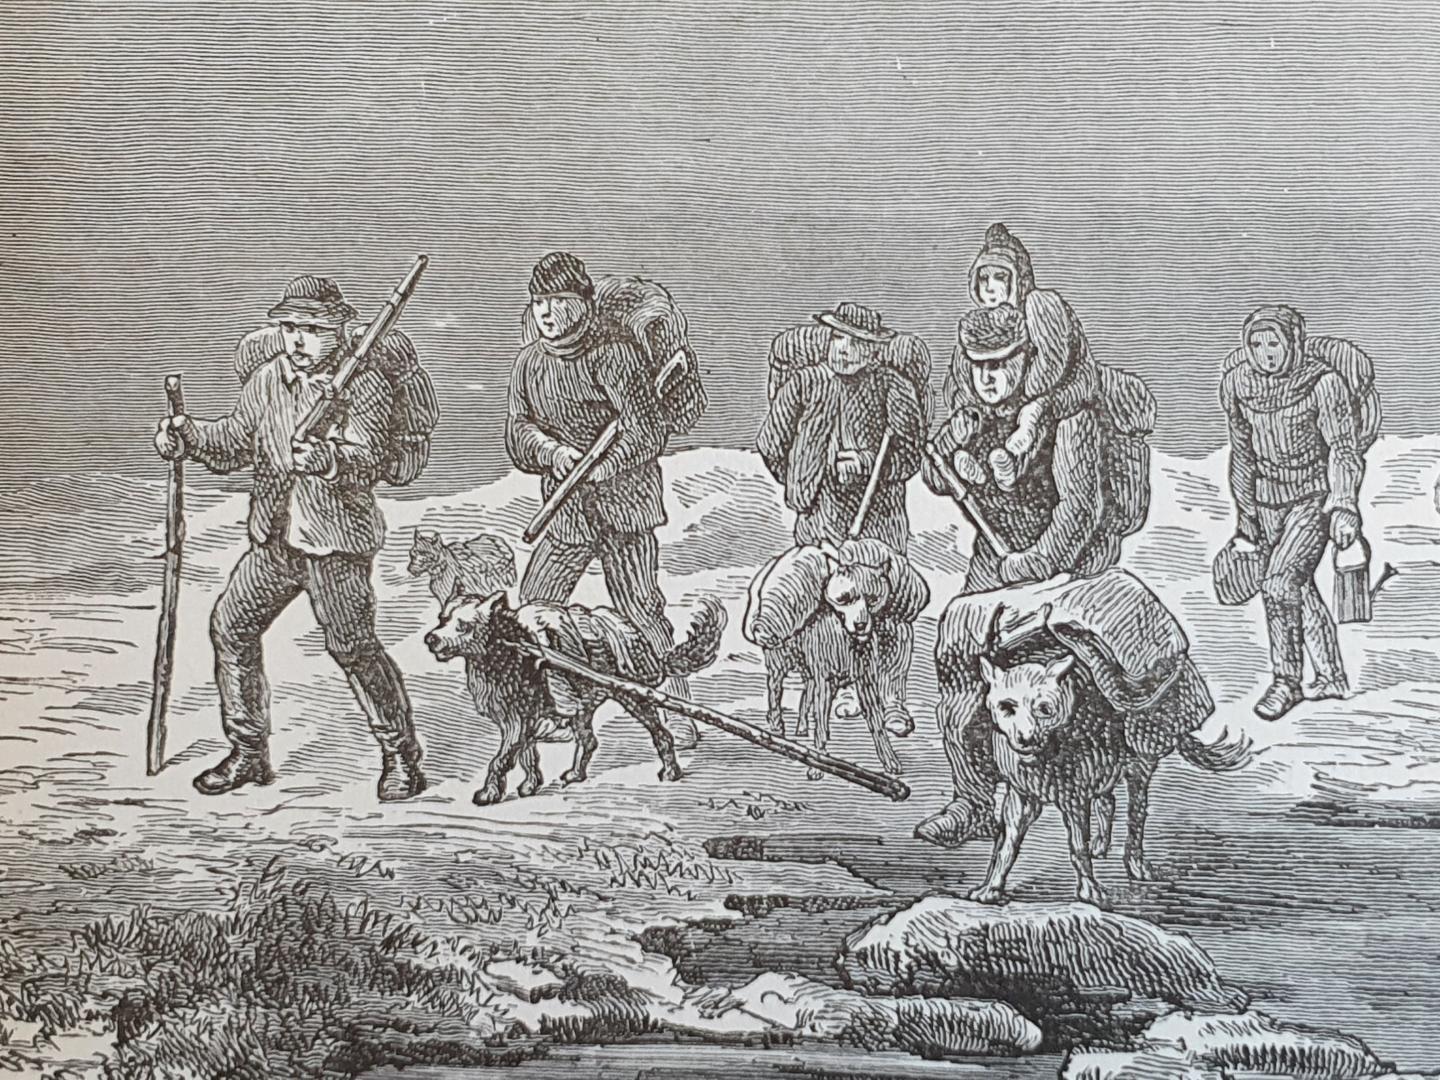 William H. Gilder - Schwatka's search. Sledging in the Arctic in quest of the Franklin records